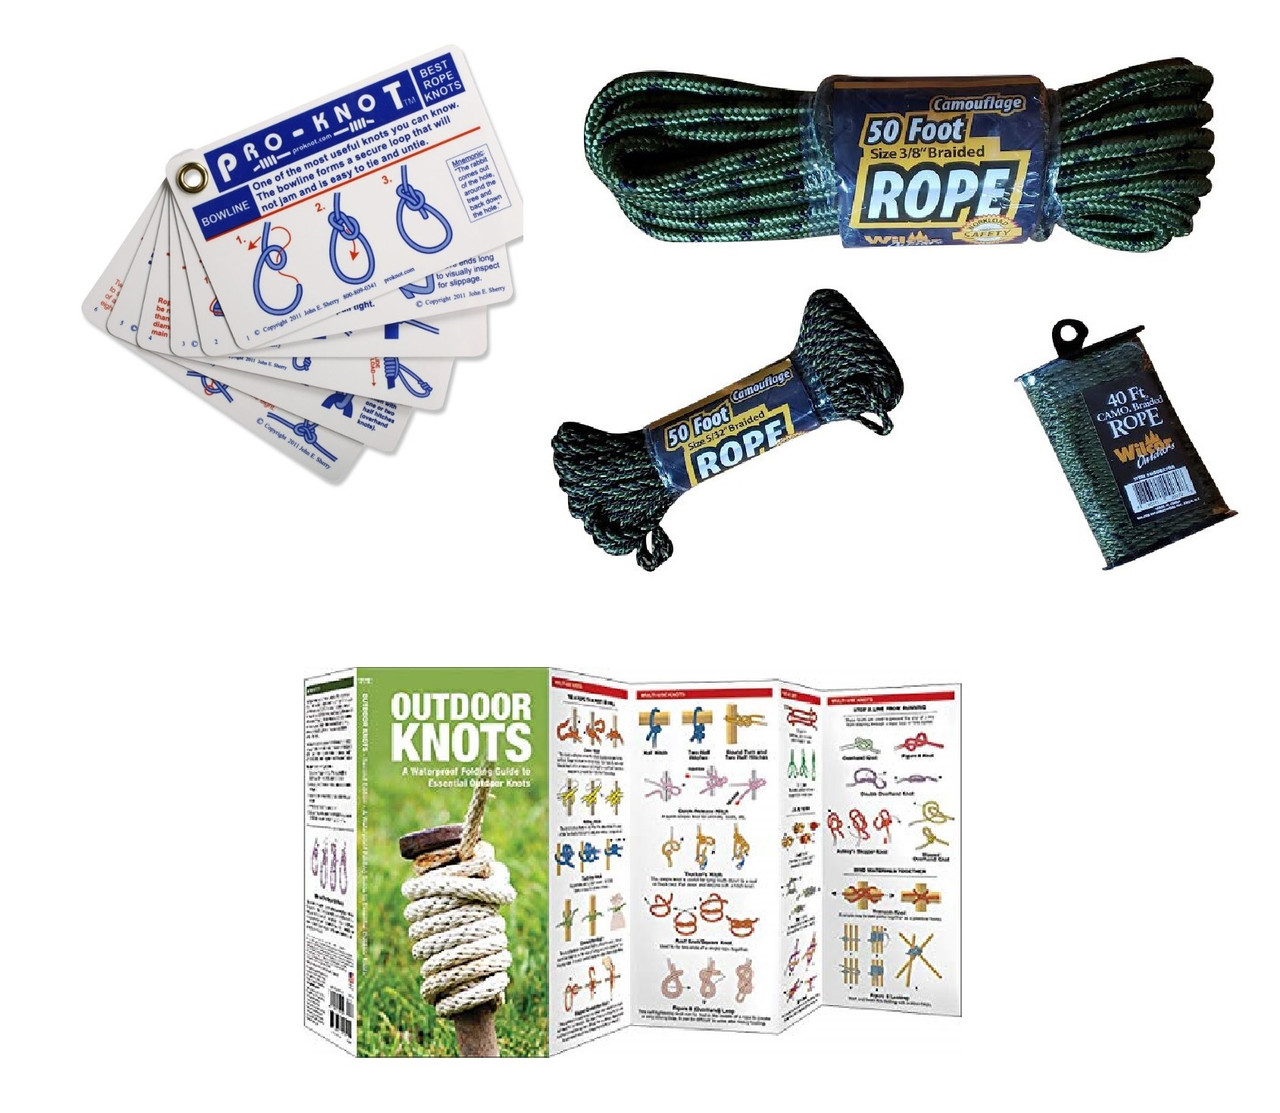 Knot Tying Kit Deluxe with 140 feet of Camo Rope in Variety of